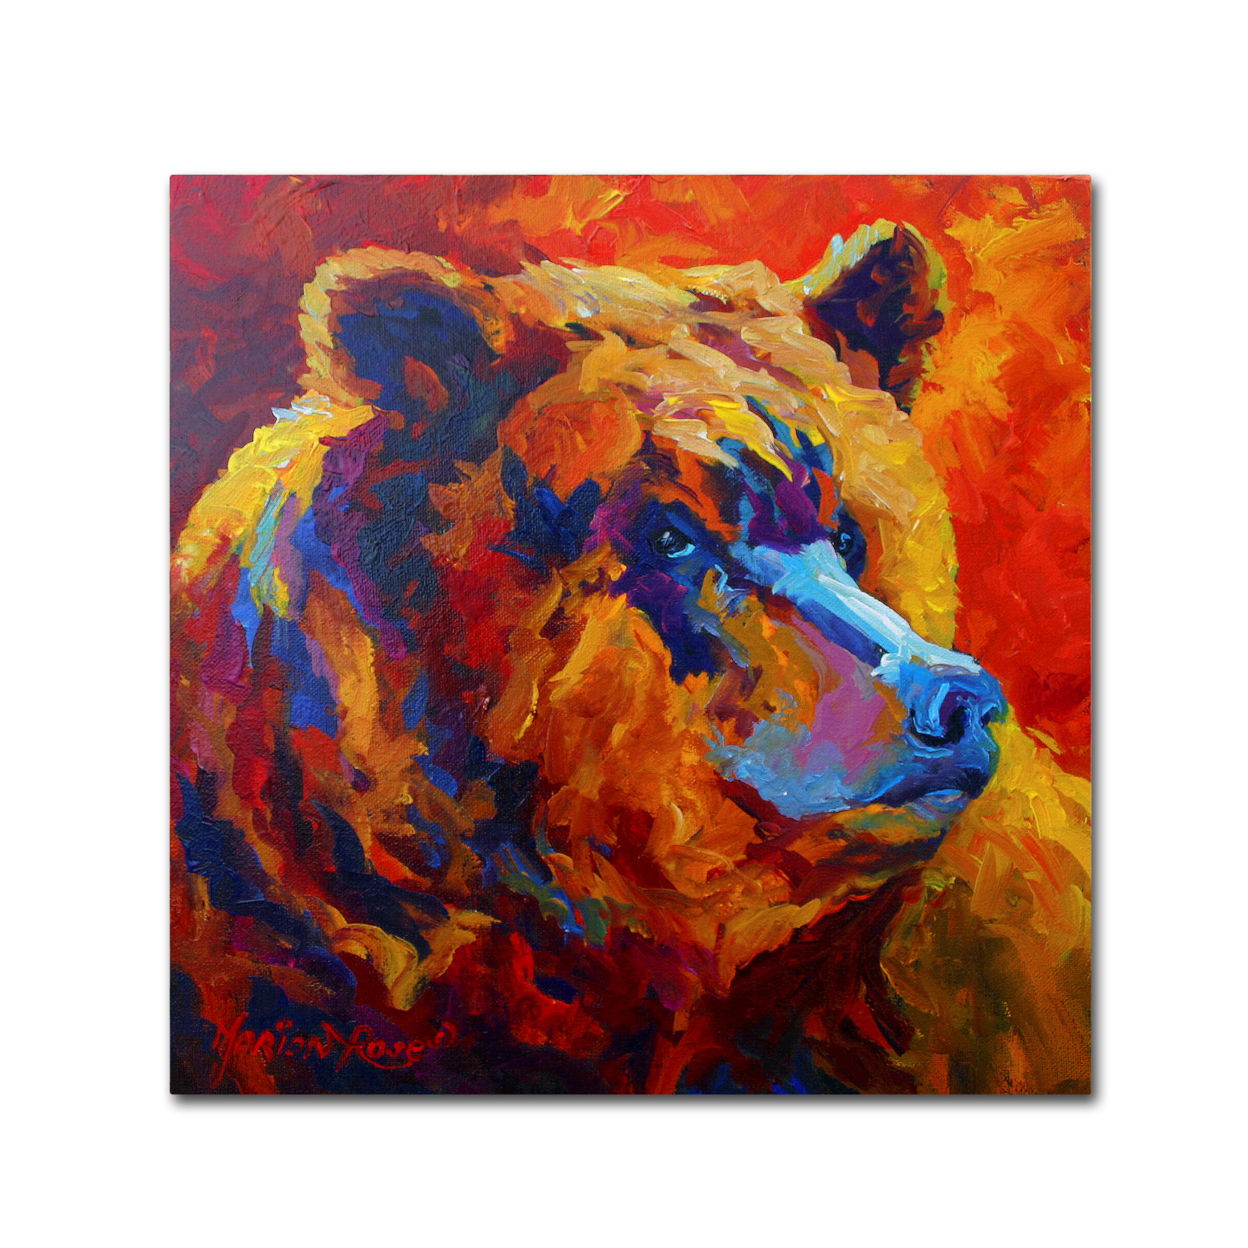 Marion Rose 'Grizz Portrait II' Ready To Hang Canvas Art 35 X 35 Inches Made In USA